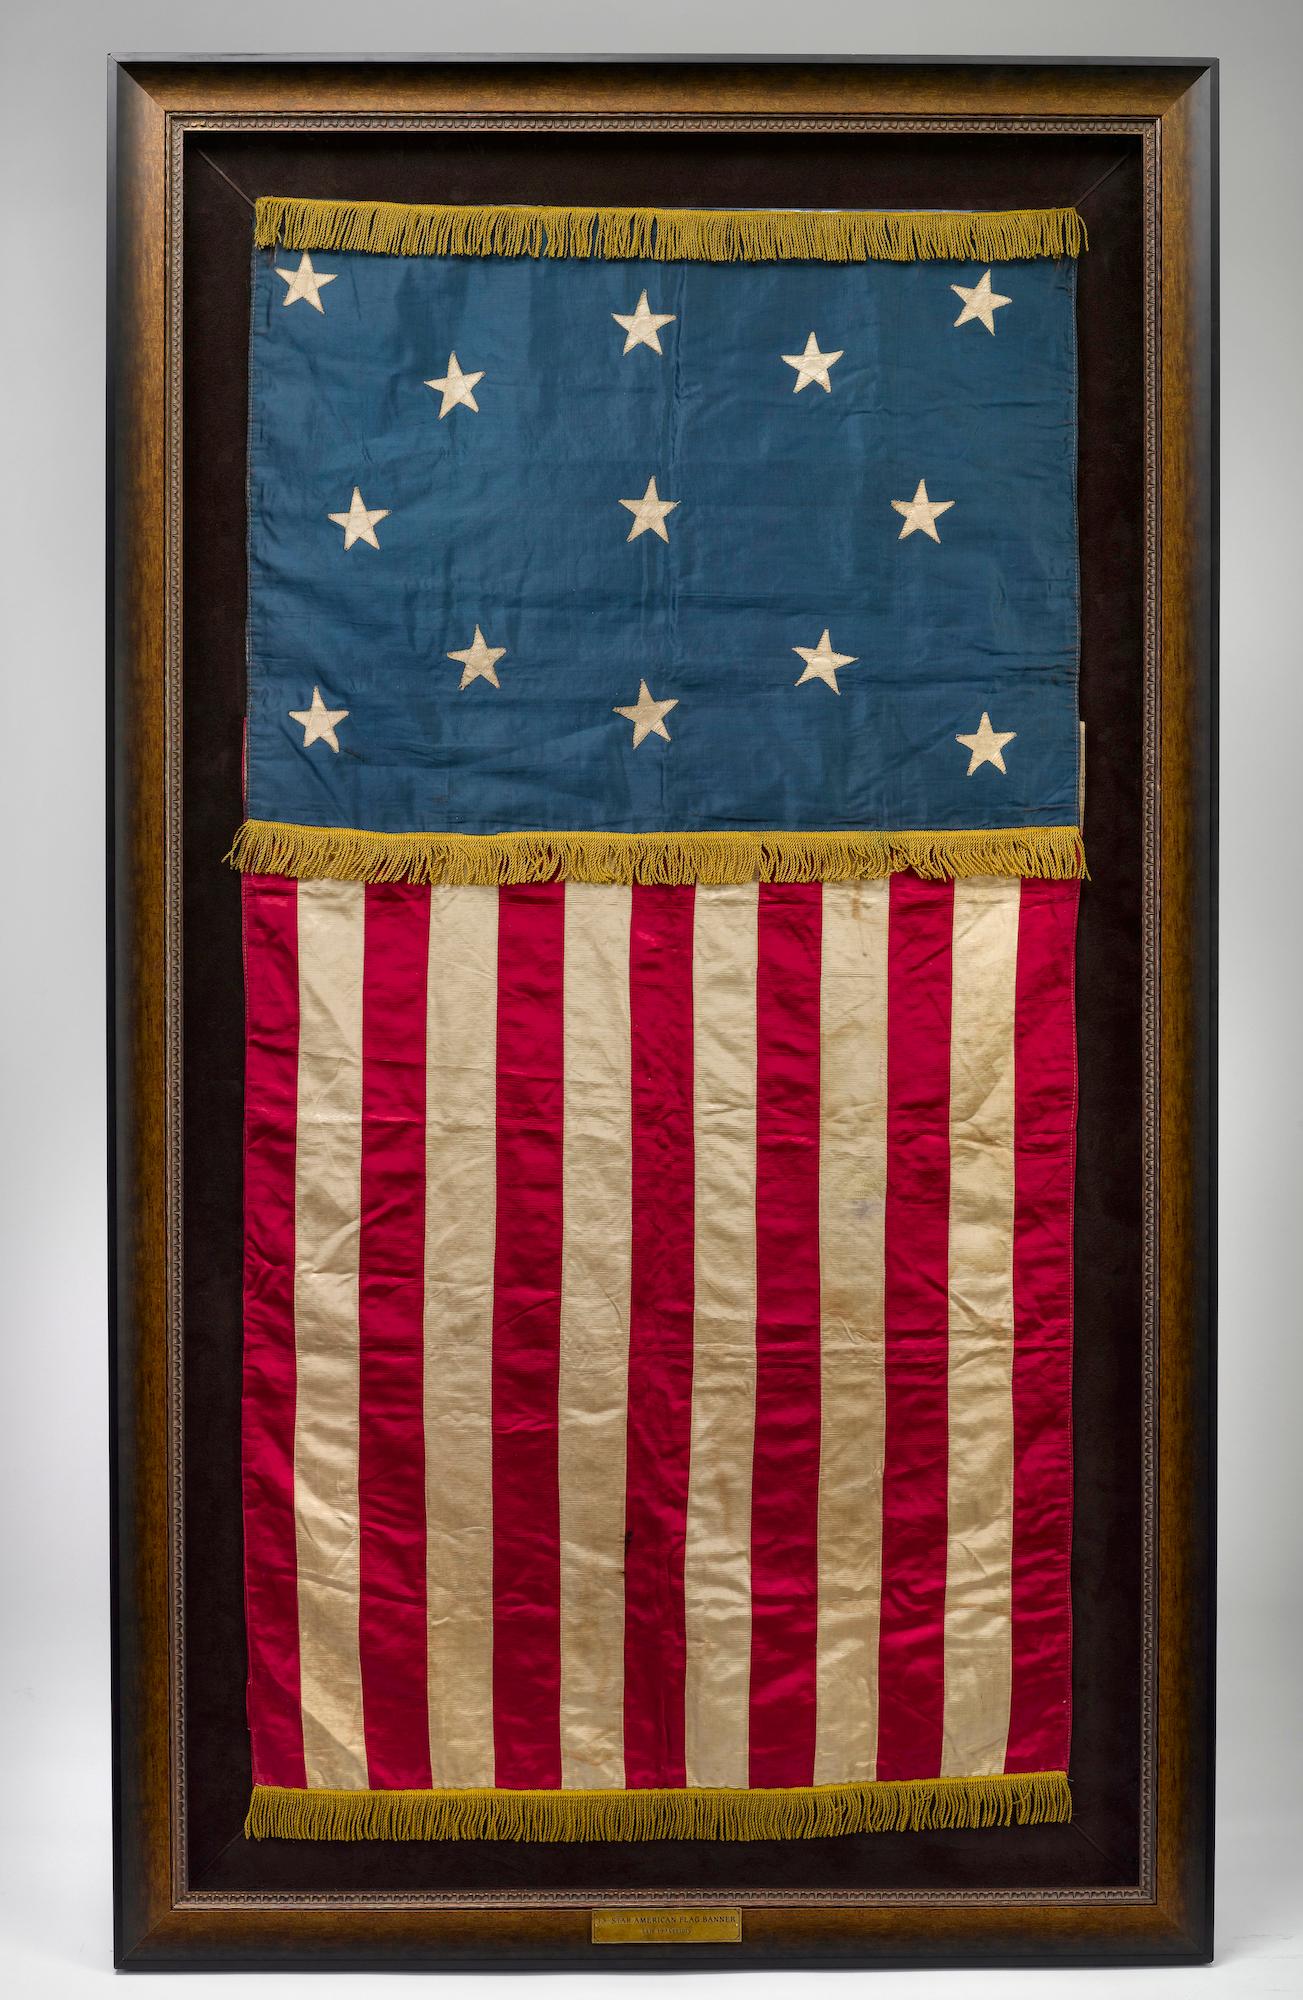 Presented is a large 13-star American flag banner, in a striking vertical format. The all-silk constructed banner features a rich blue canton with 13 white stars. The silk stars are machine-sewn, single appliquéd, and arranged in an unusual